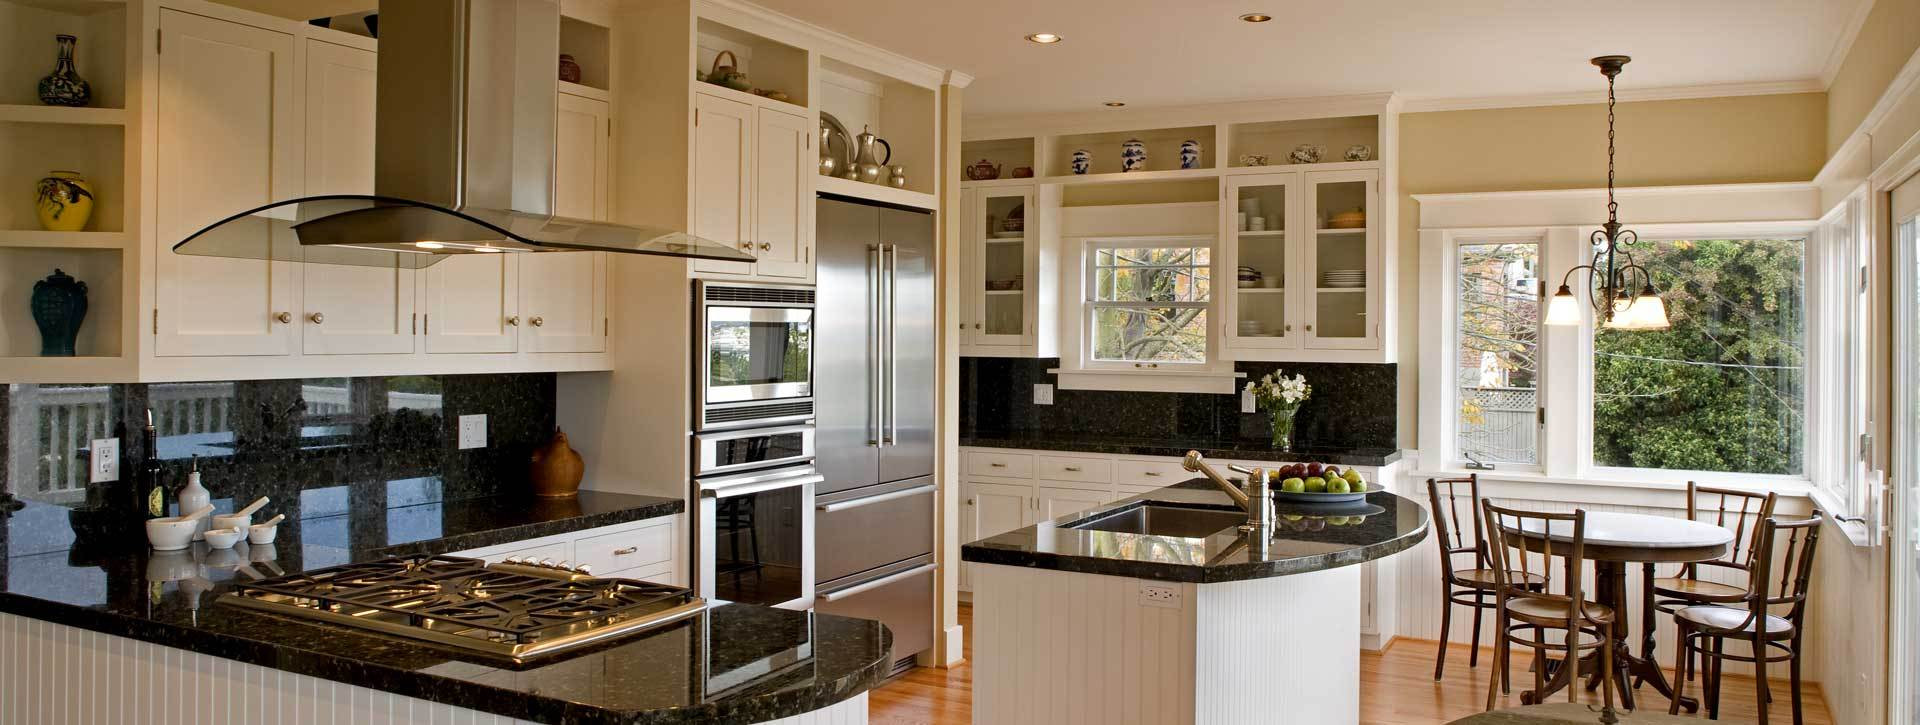 Small Kitchen Reno Cost
 Kitchen Remodel Estimator to Set Your Bud